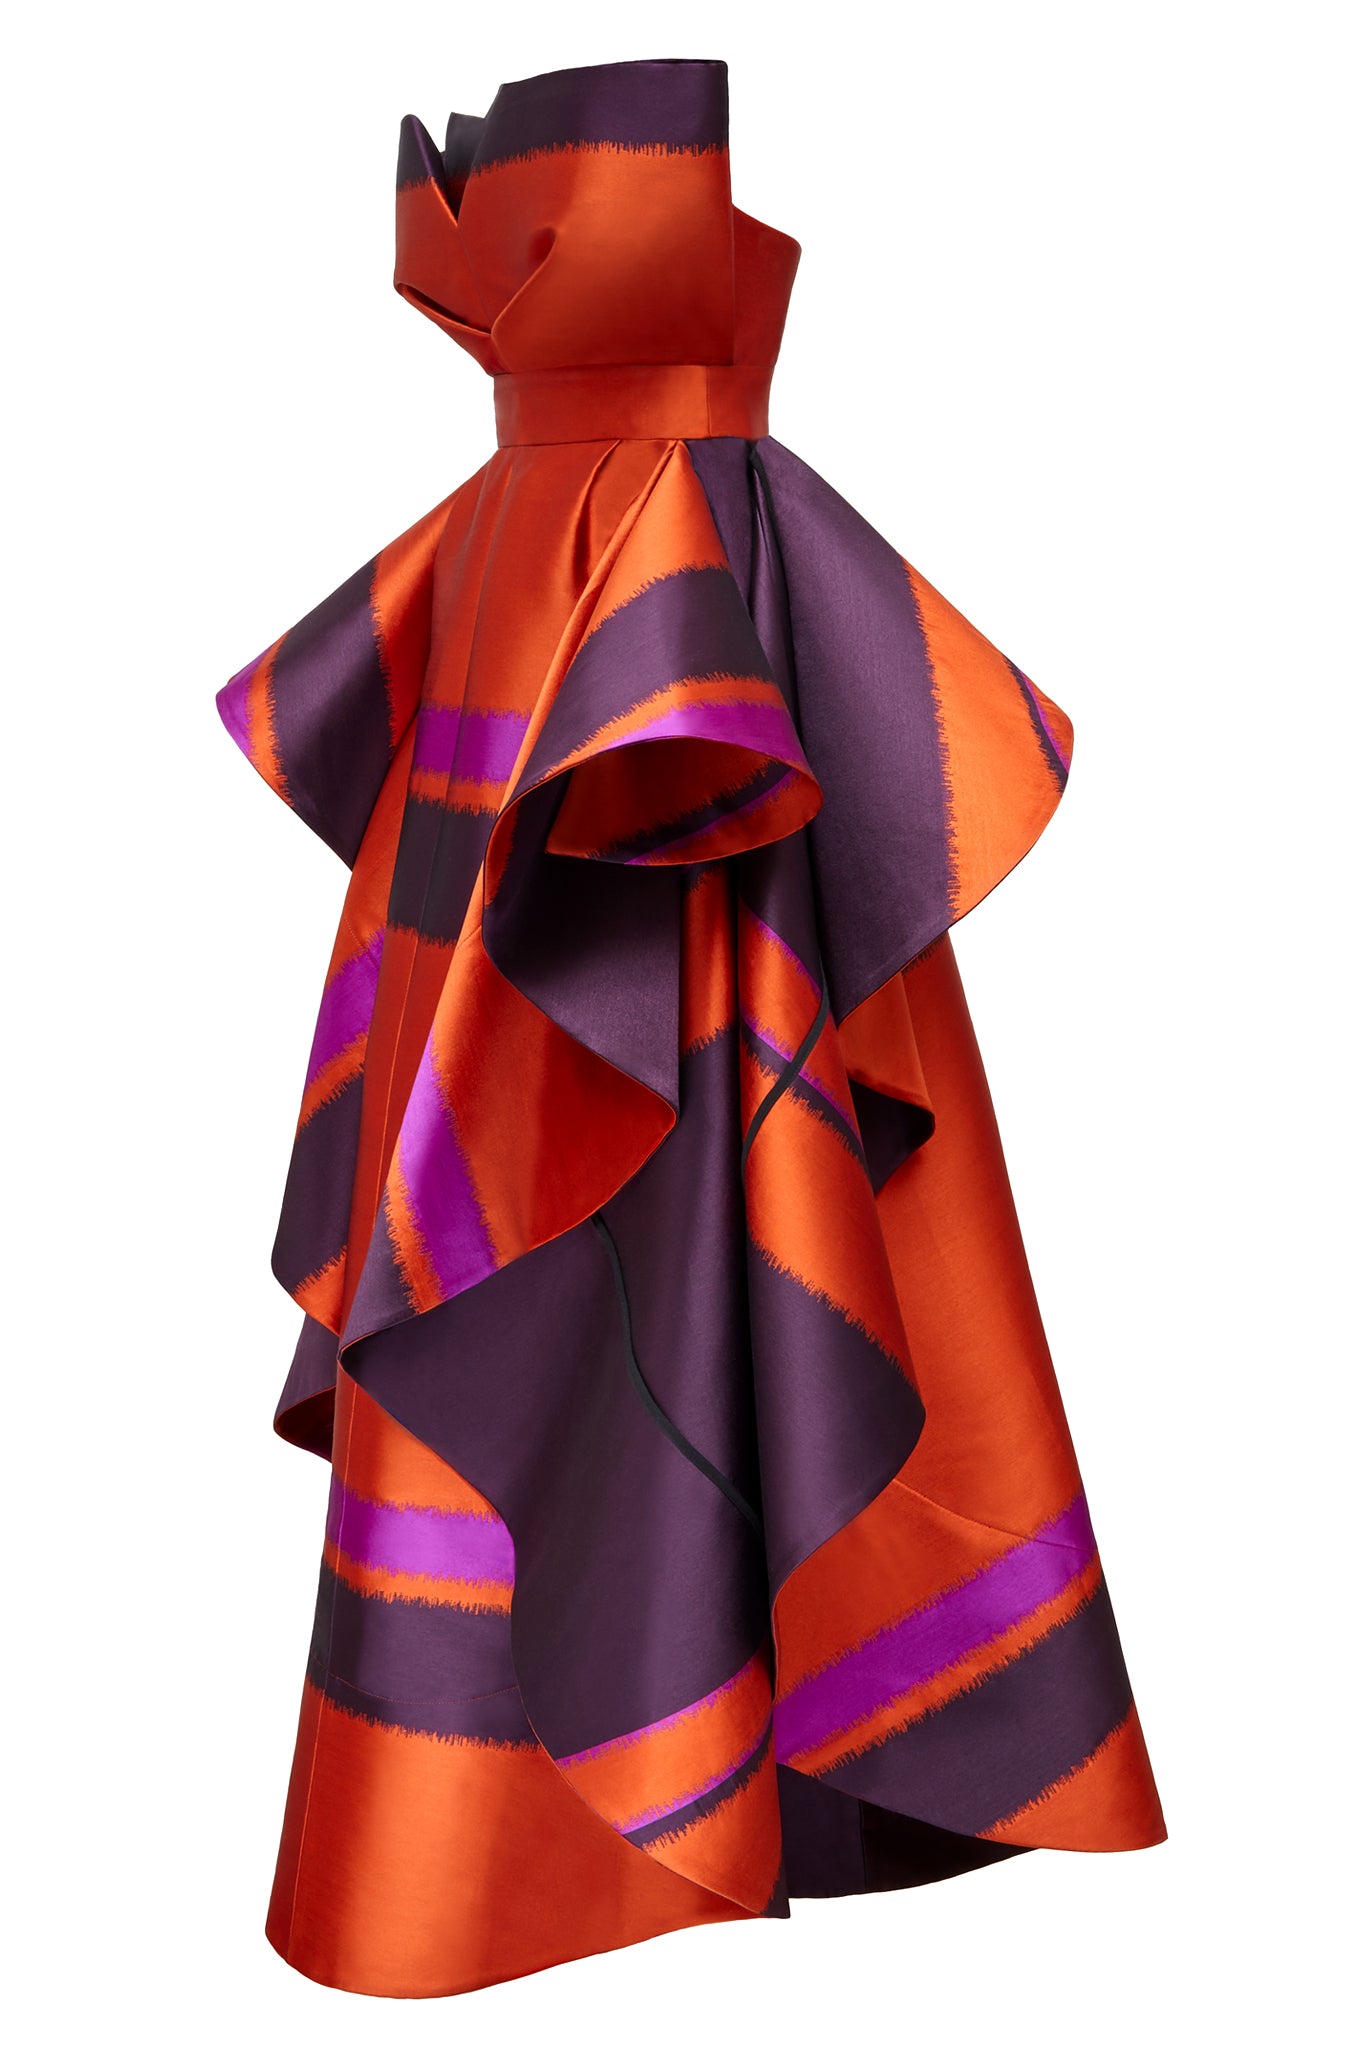 Another feature piece on our AW17 catwalk, this 'erupt' dress is fabricated here in a striped orange, pink and deep purple blended silk, this breathtaking evening / occasion dress is the perfect piece for any event if you want to stand out from the crowd.   Fitted at the waist, and comprising of an internal corset, the 3D drape at the front gives a sculptural element that balances perfectly with the dramatic sides.